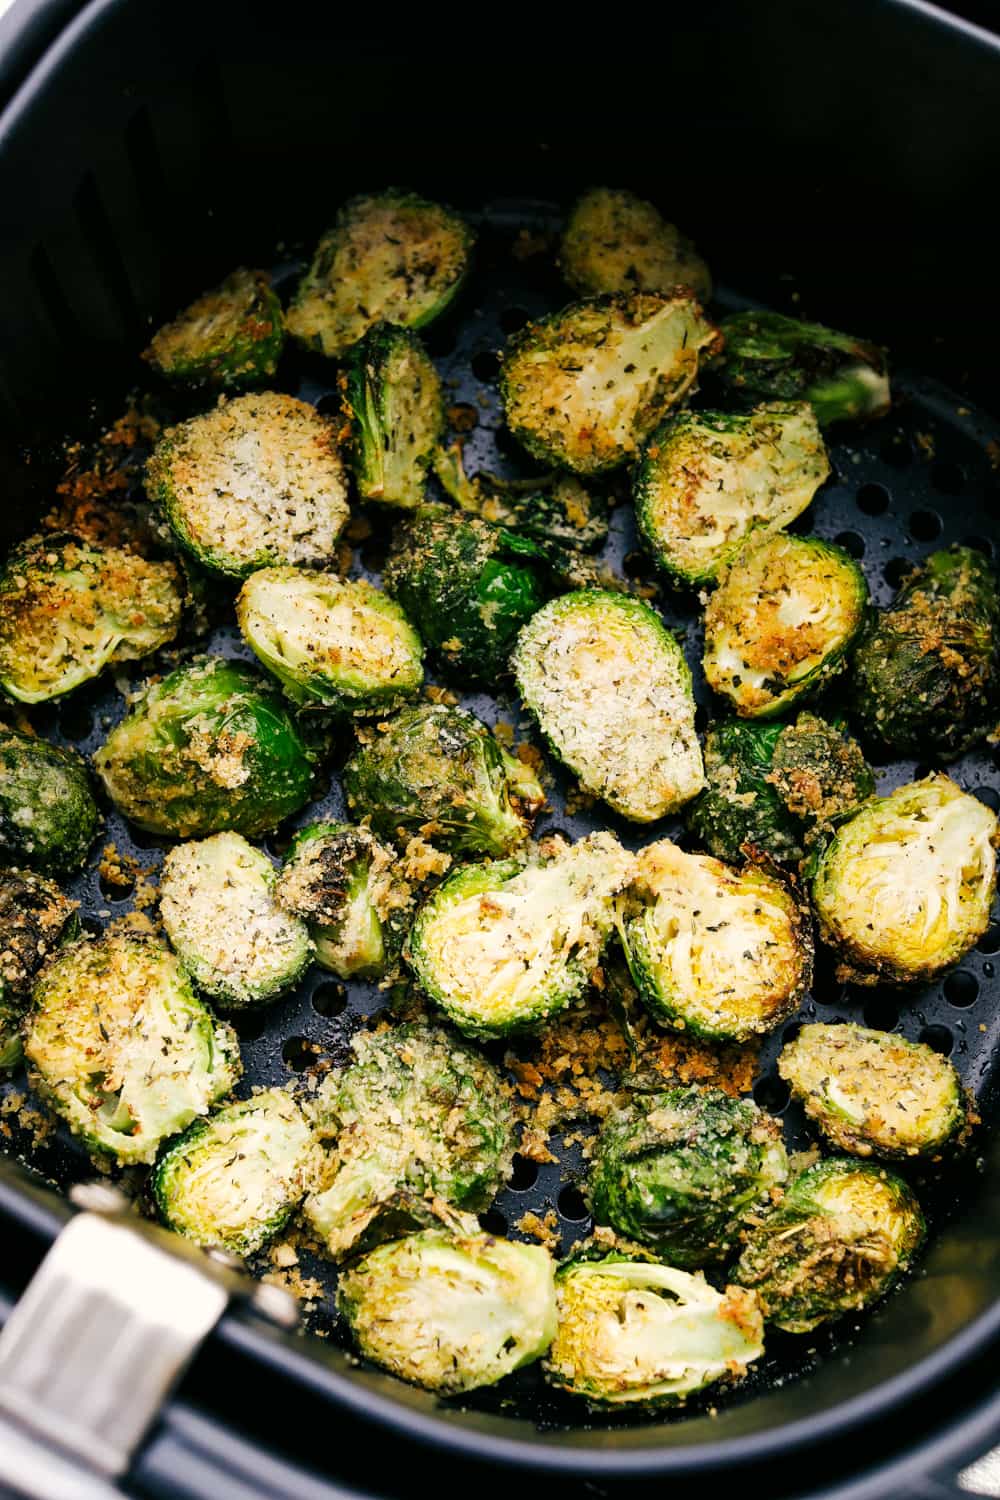 Crispy, parmesan crusted brussel sprouts in the air fryer.